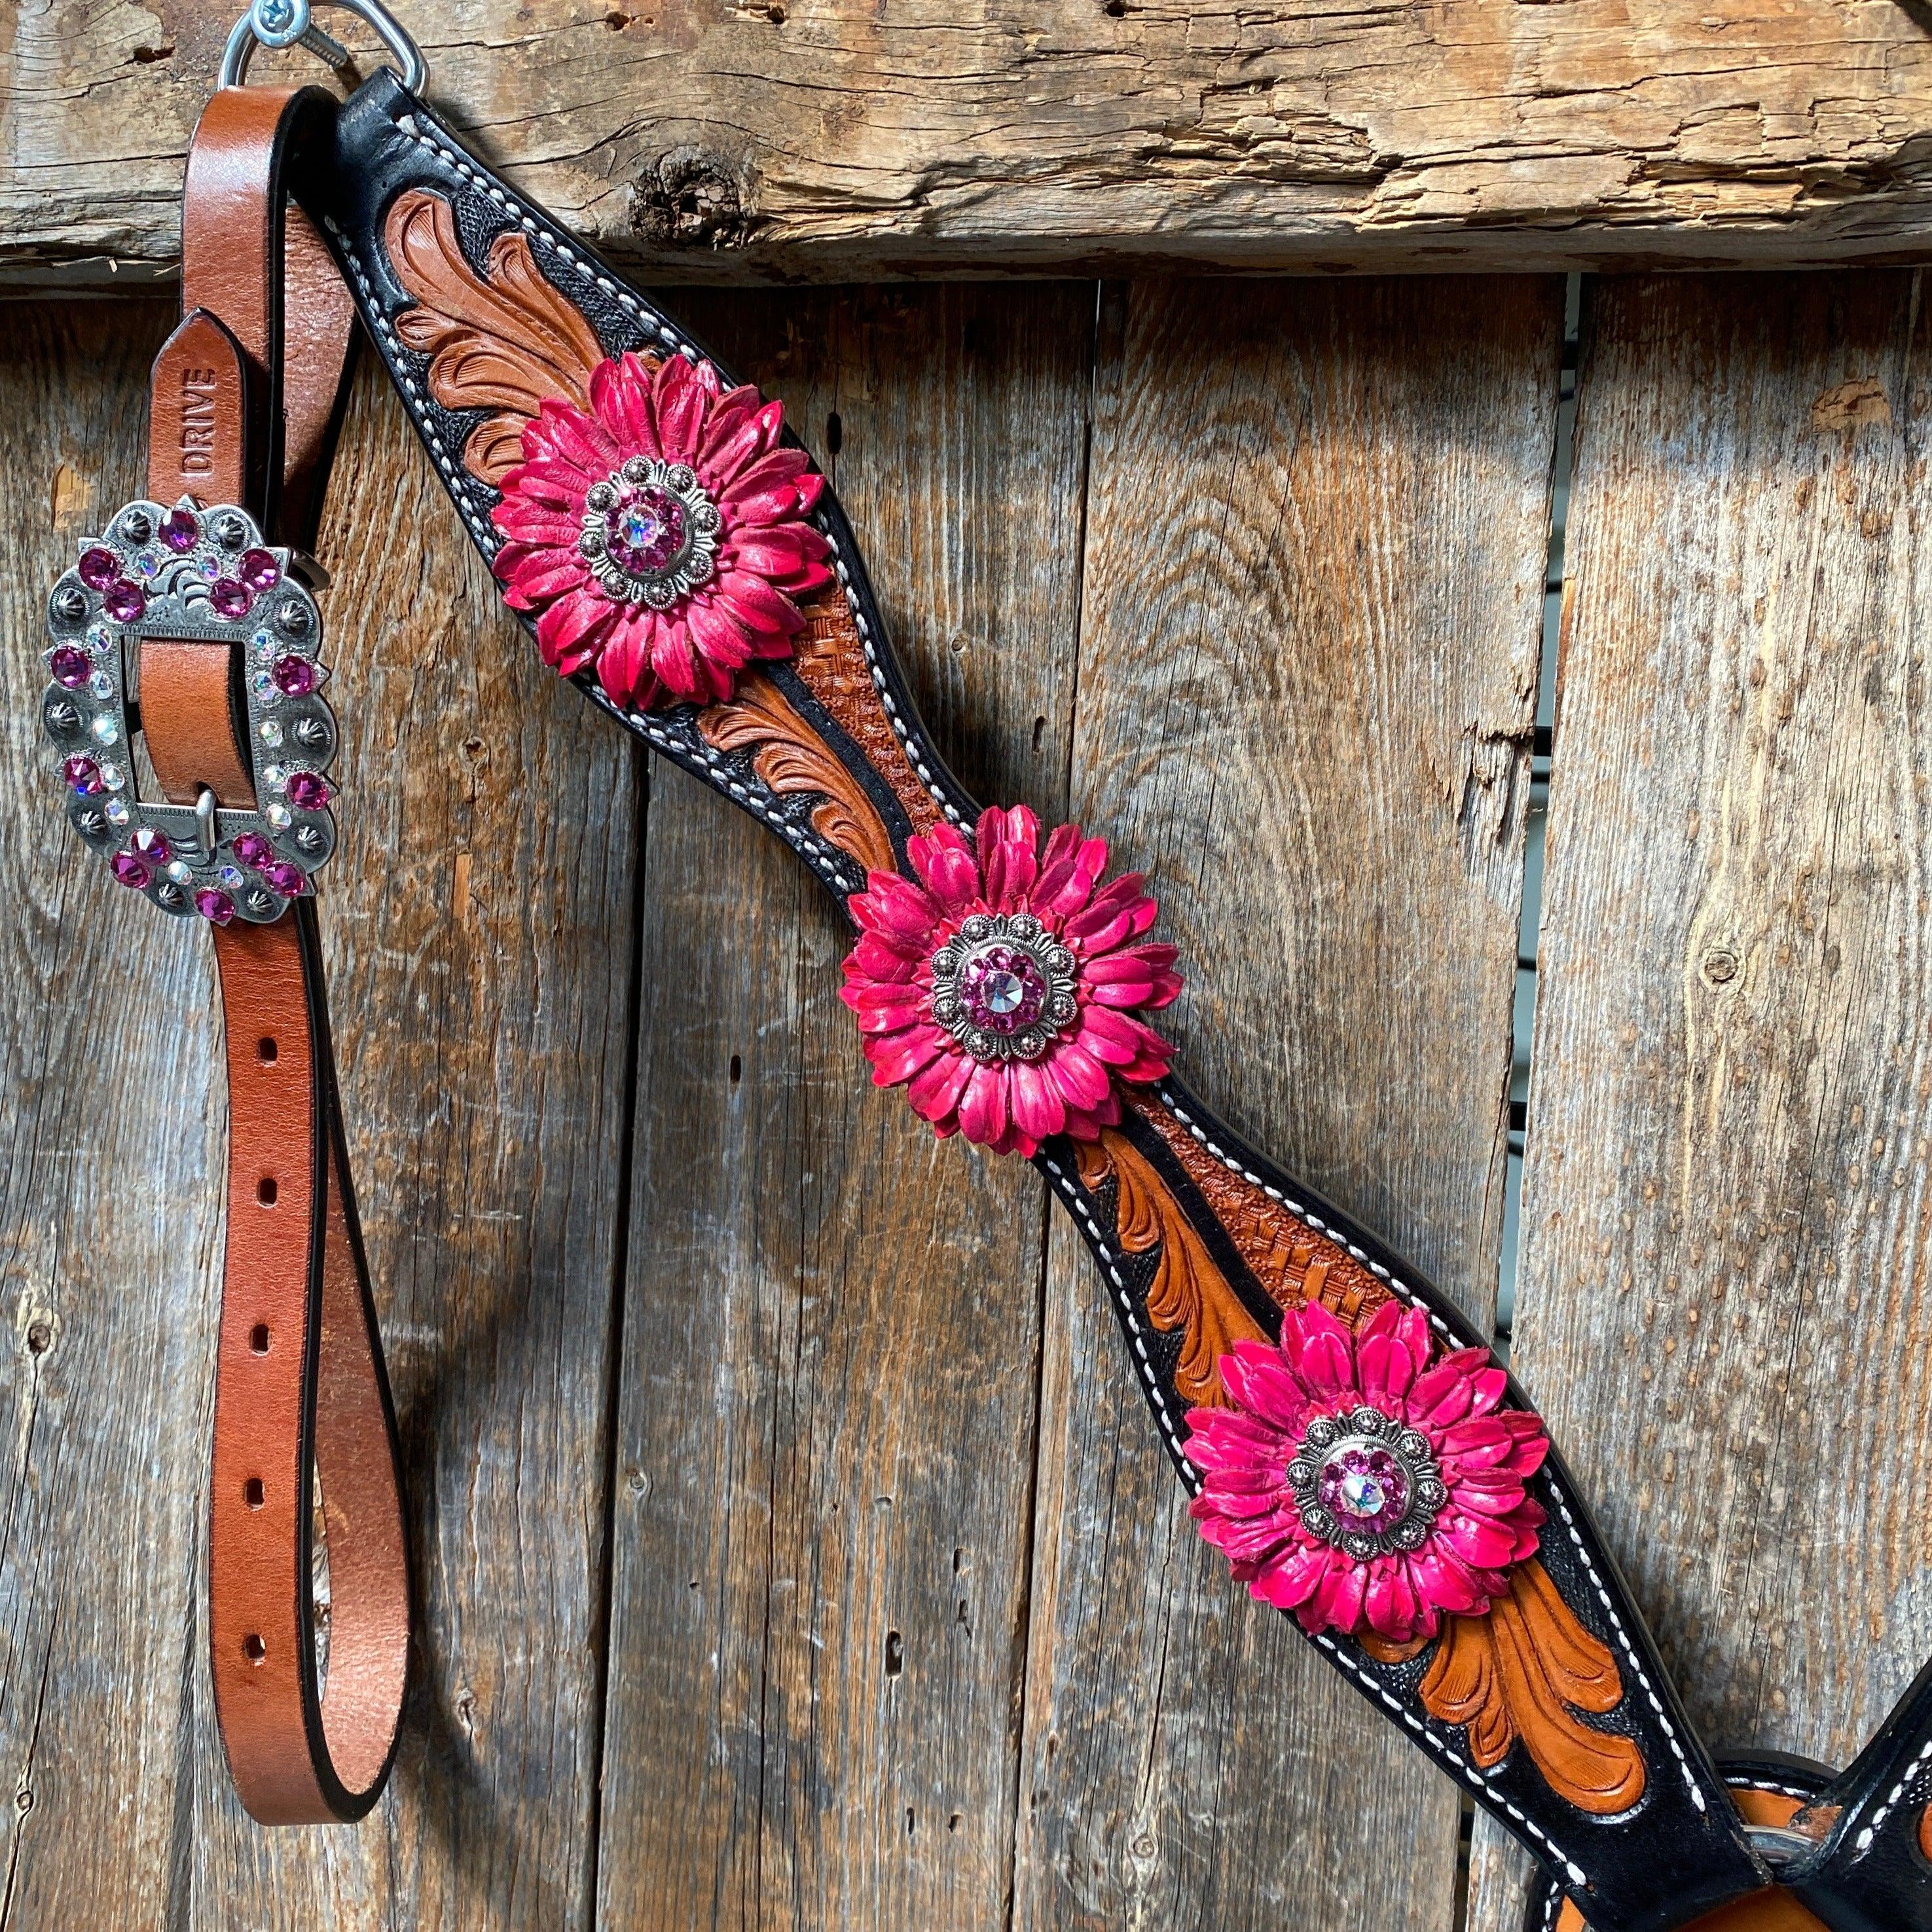 Leaf Scalloped Two Tone Pink Daisy One Ear Headstall / Bridle & Breastcollar Set #OEBC410 - RODEO DRIVE